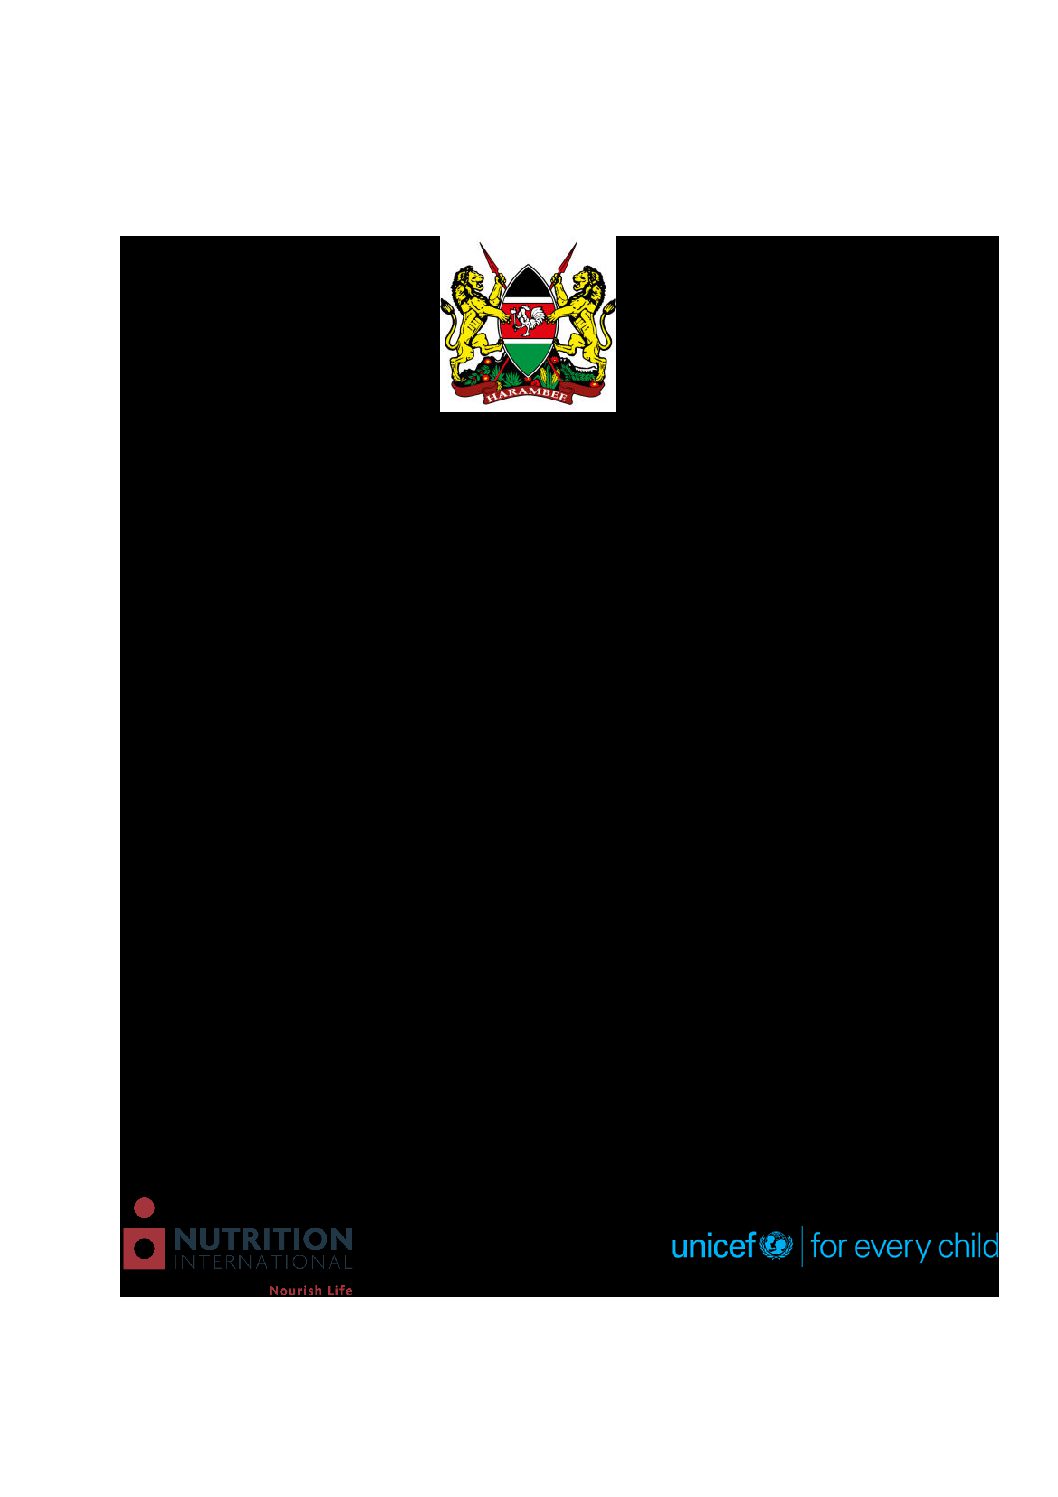 Kenya National Nutrition Action Plan 2012-2017 Implementation Review Report thumbnail